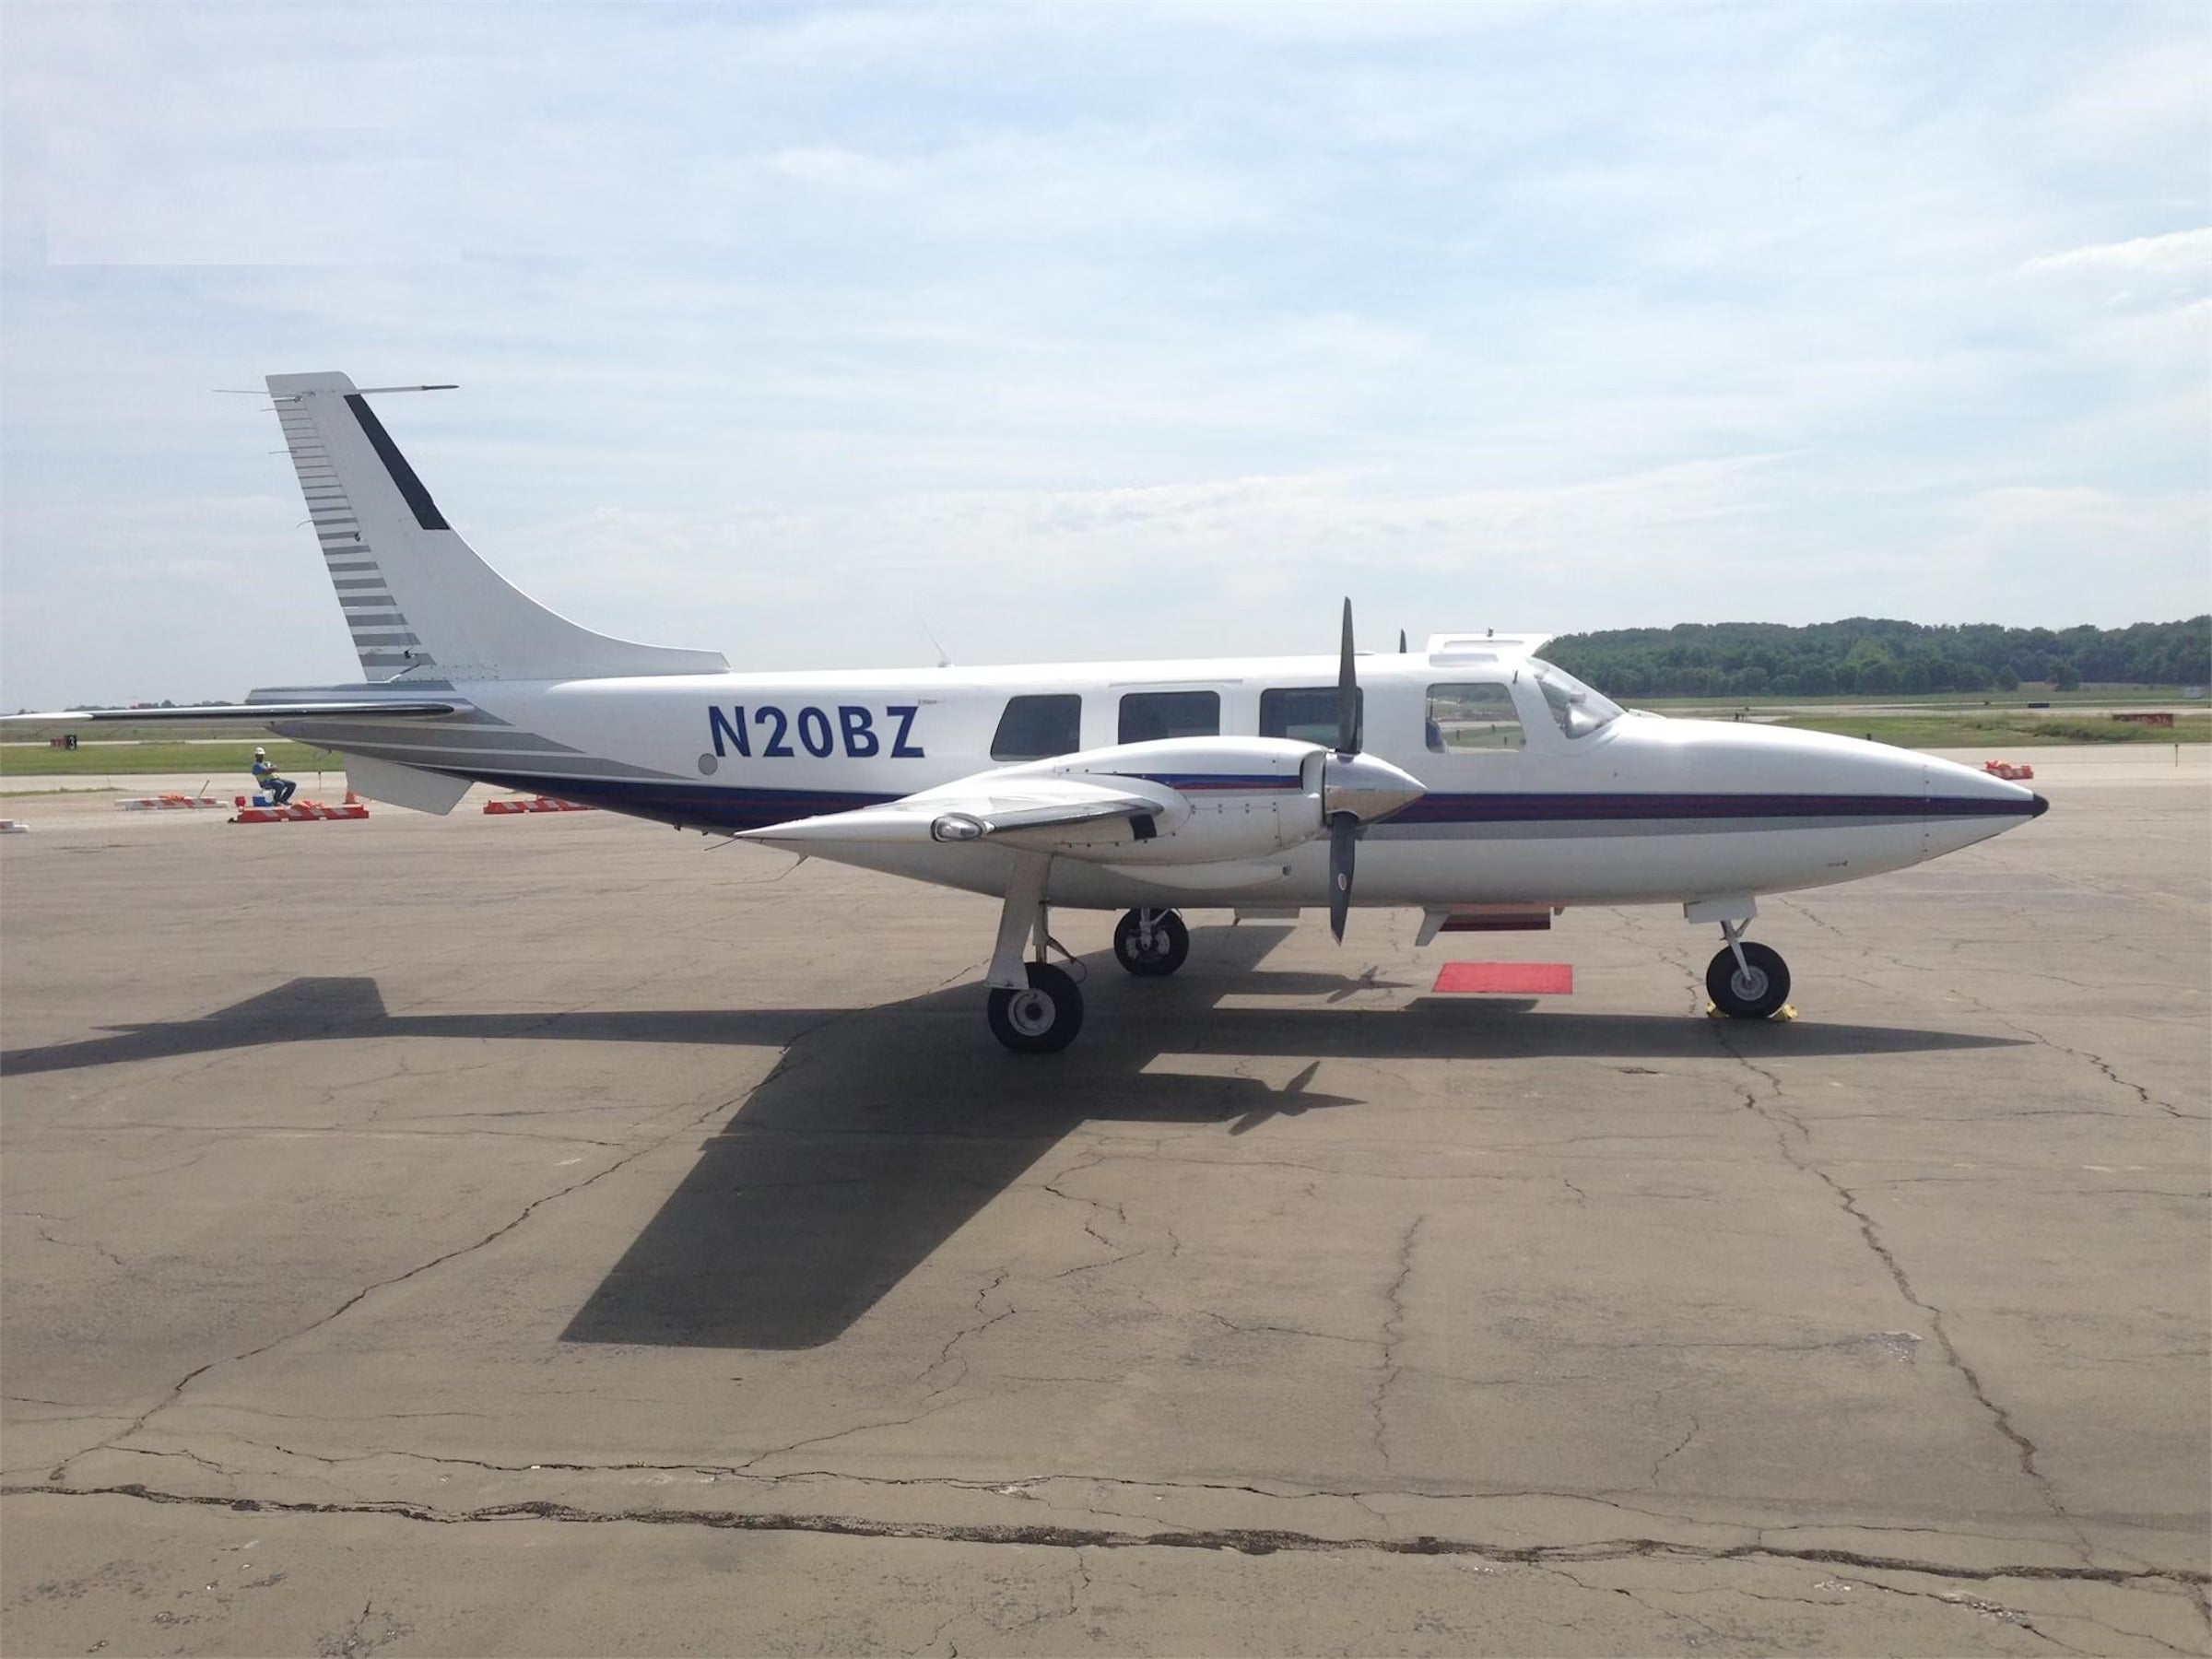 This 1981 Piper PA-60-602 Aerostar Is a Famously Fast ‘AircraftForSale’ Top Pick